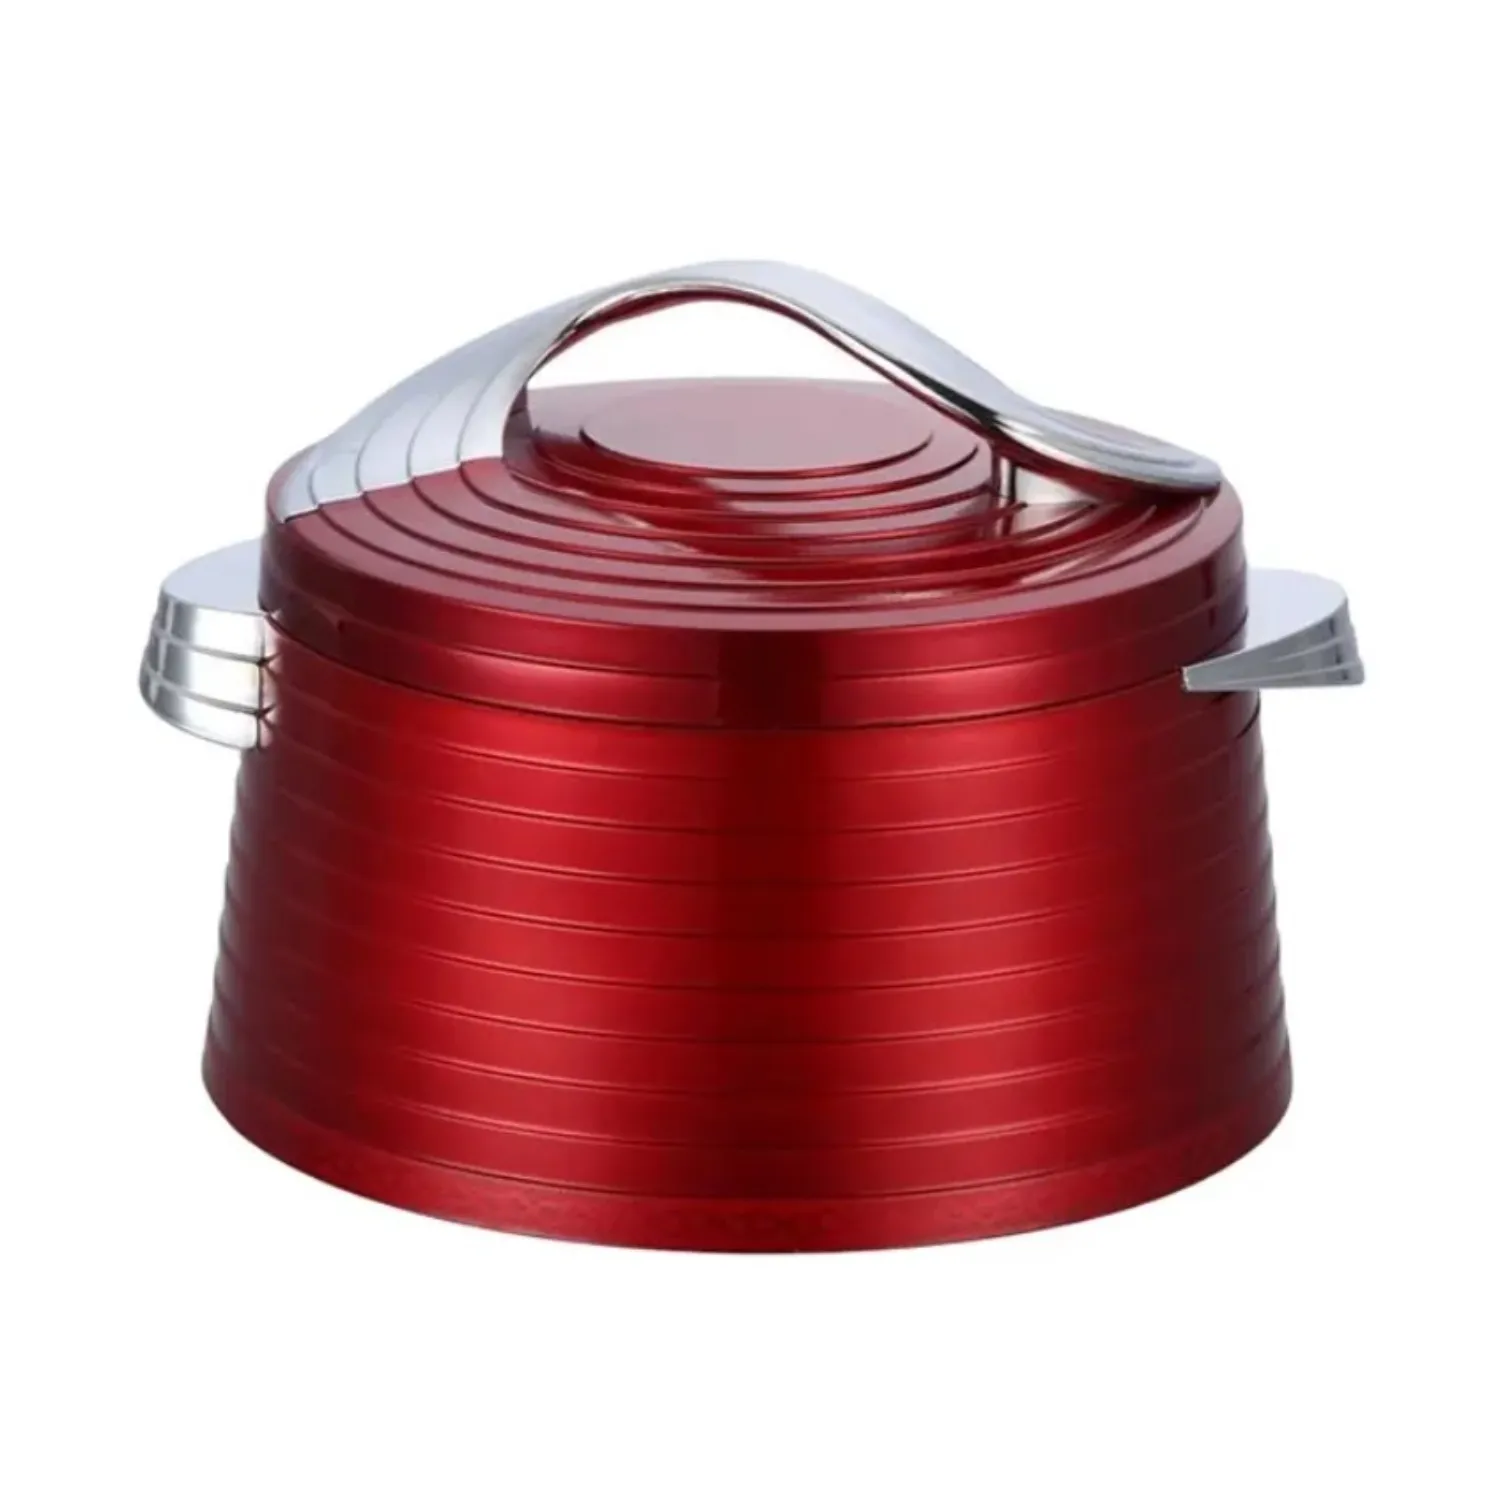 Elegant Beautiful Red Color Copper Food Heating Equipment For Serving Food And Restaurant Table Top